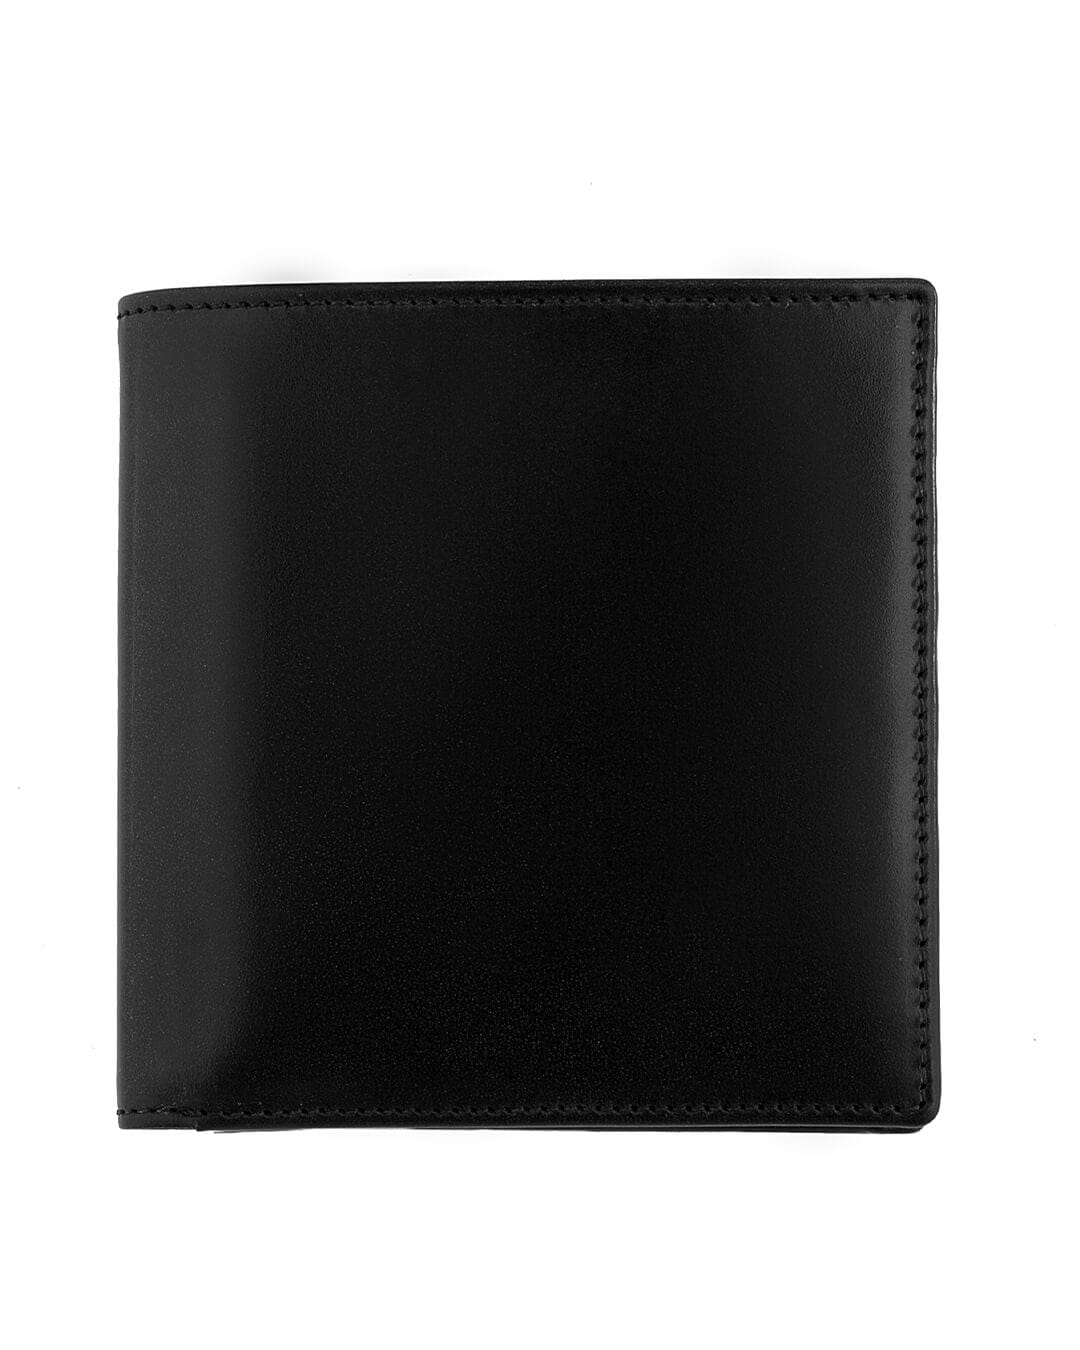 Cavesson's Wallets Cavesson's Black And Red Coin Wallet